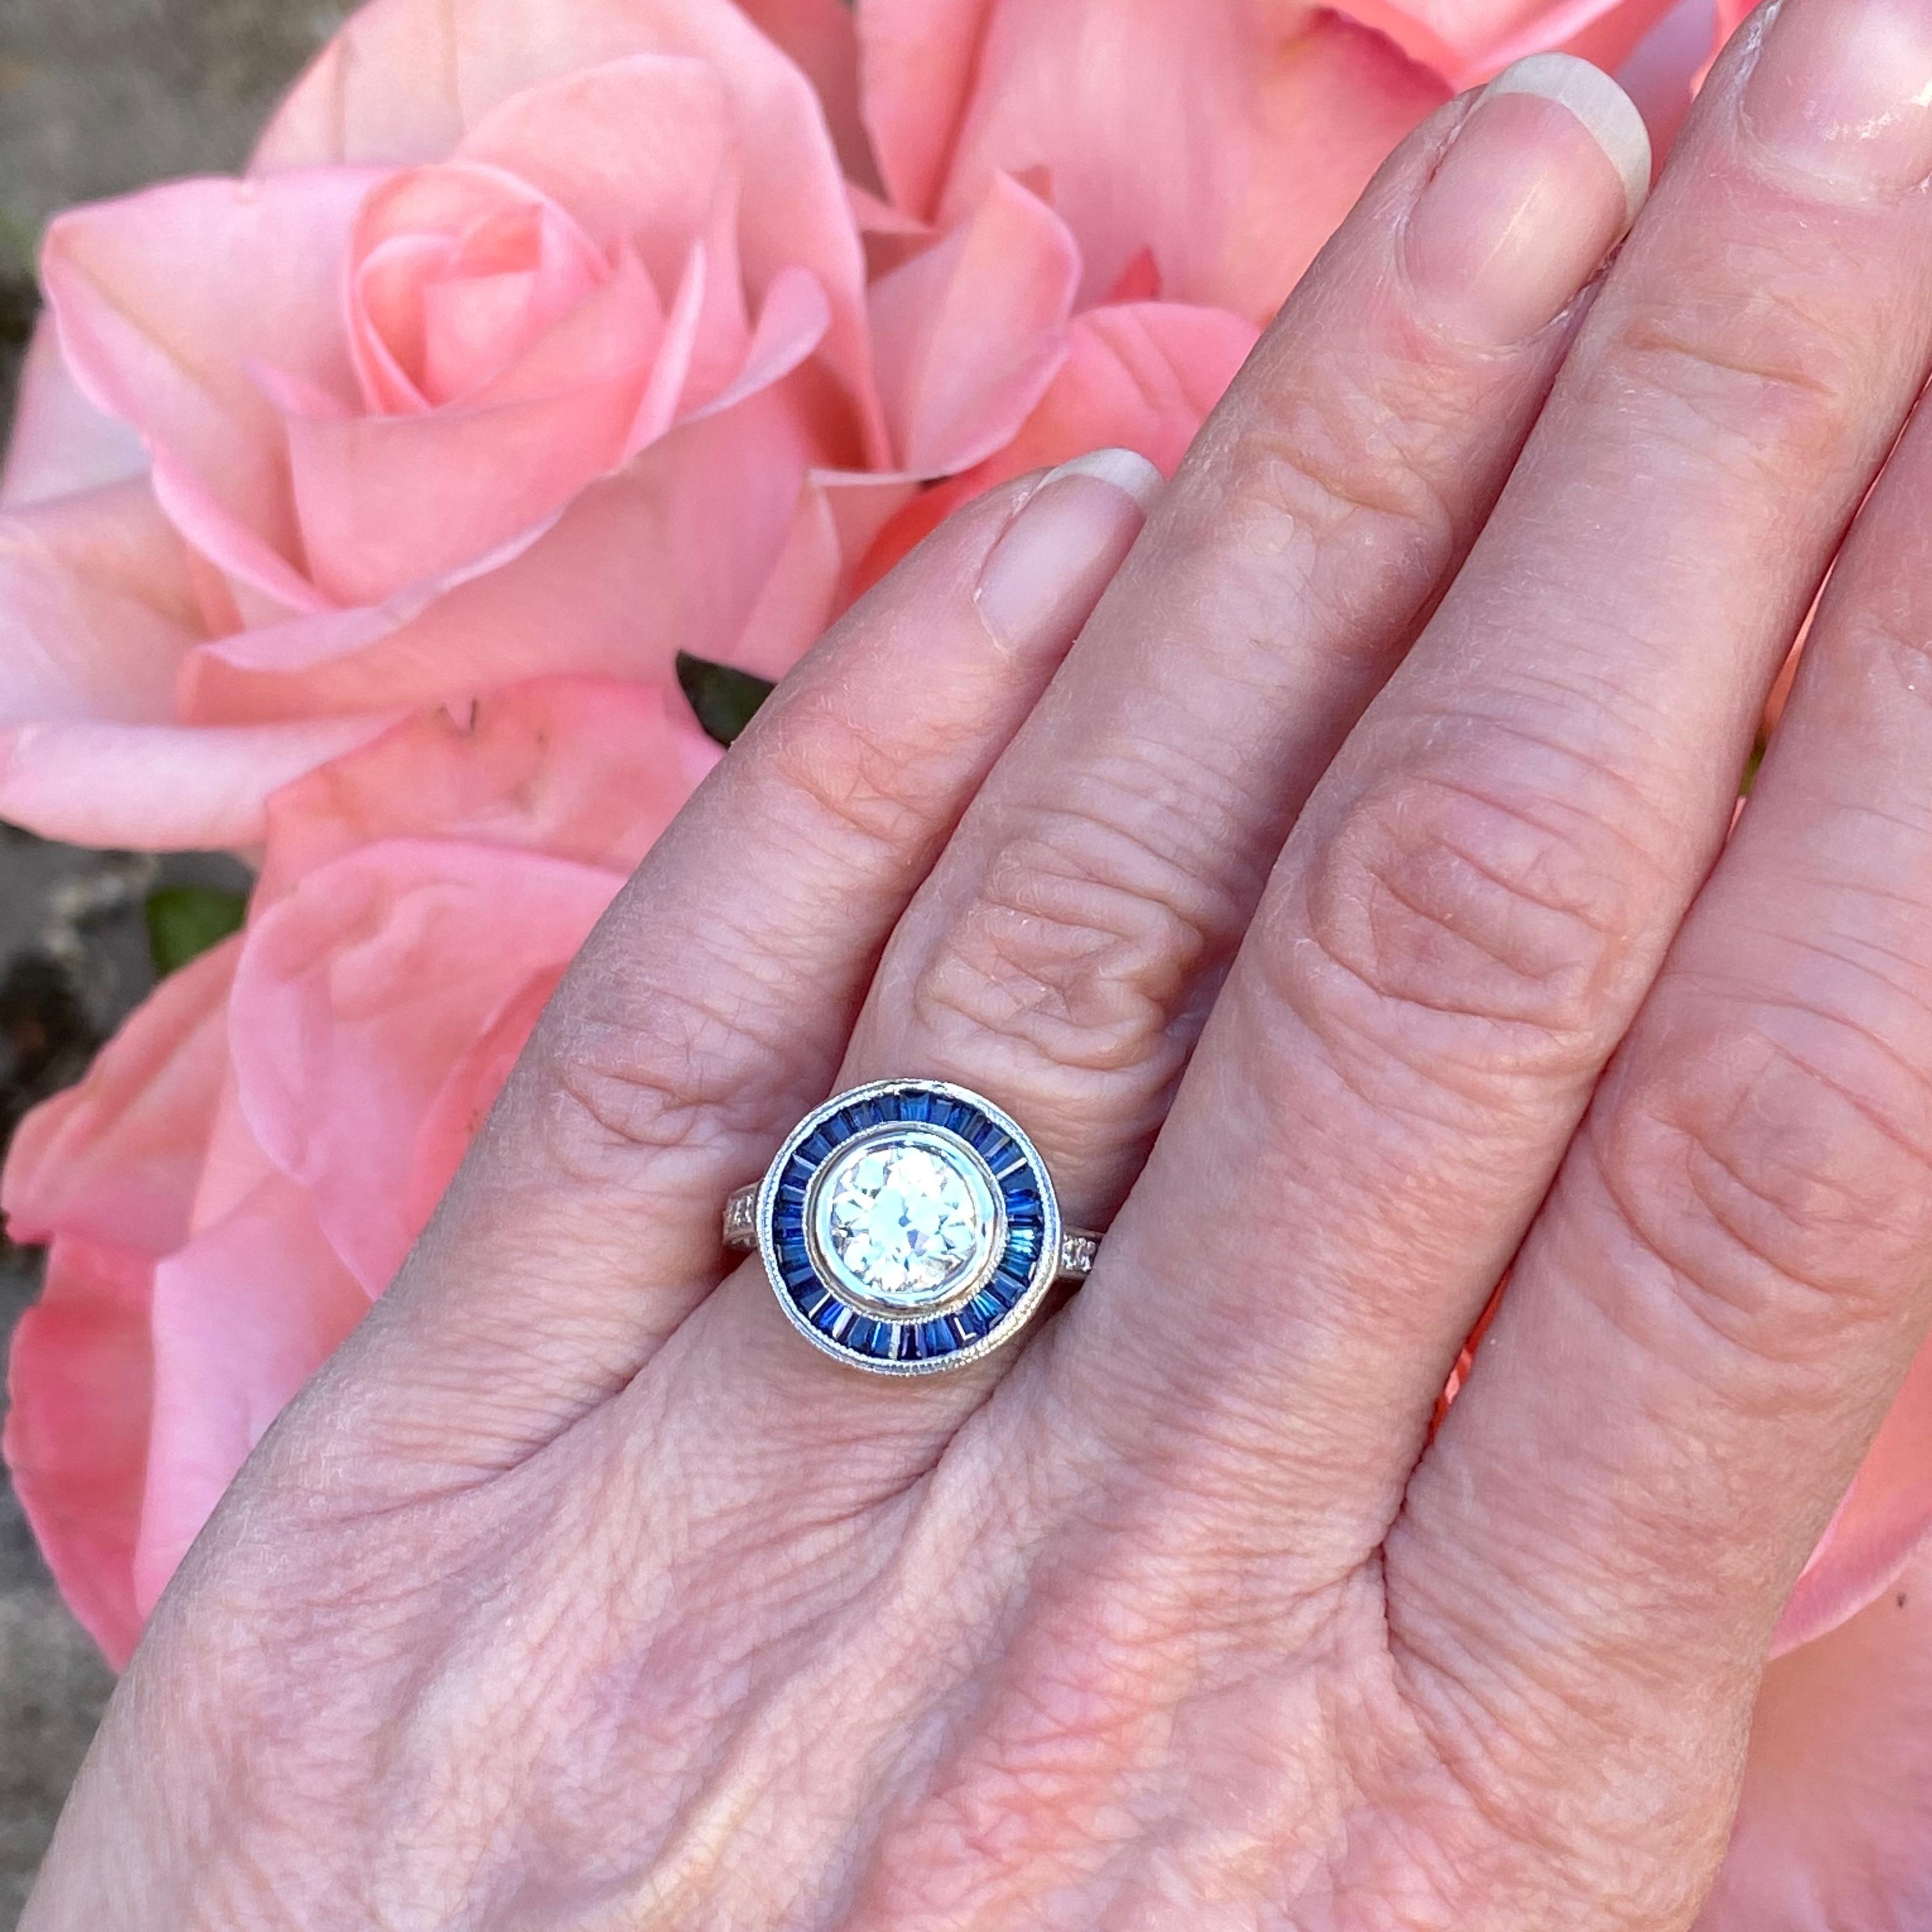 Details:
Stunning vintage Art Deco style diamond & sapphire engagement ring. The band is platinum. This is an gorgeous ring with lovely engraving around the shoulders of the band, and has engraving details surrounding the diamond. This ring is